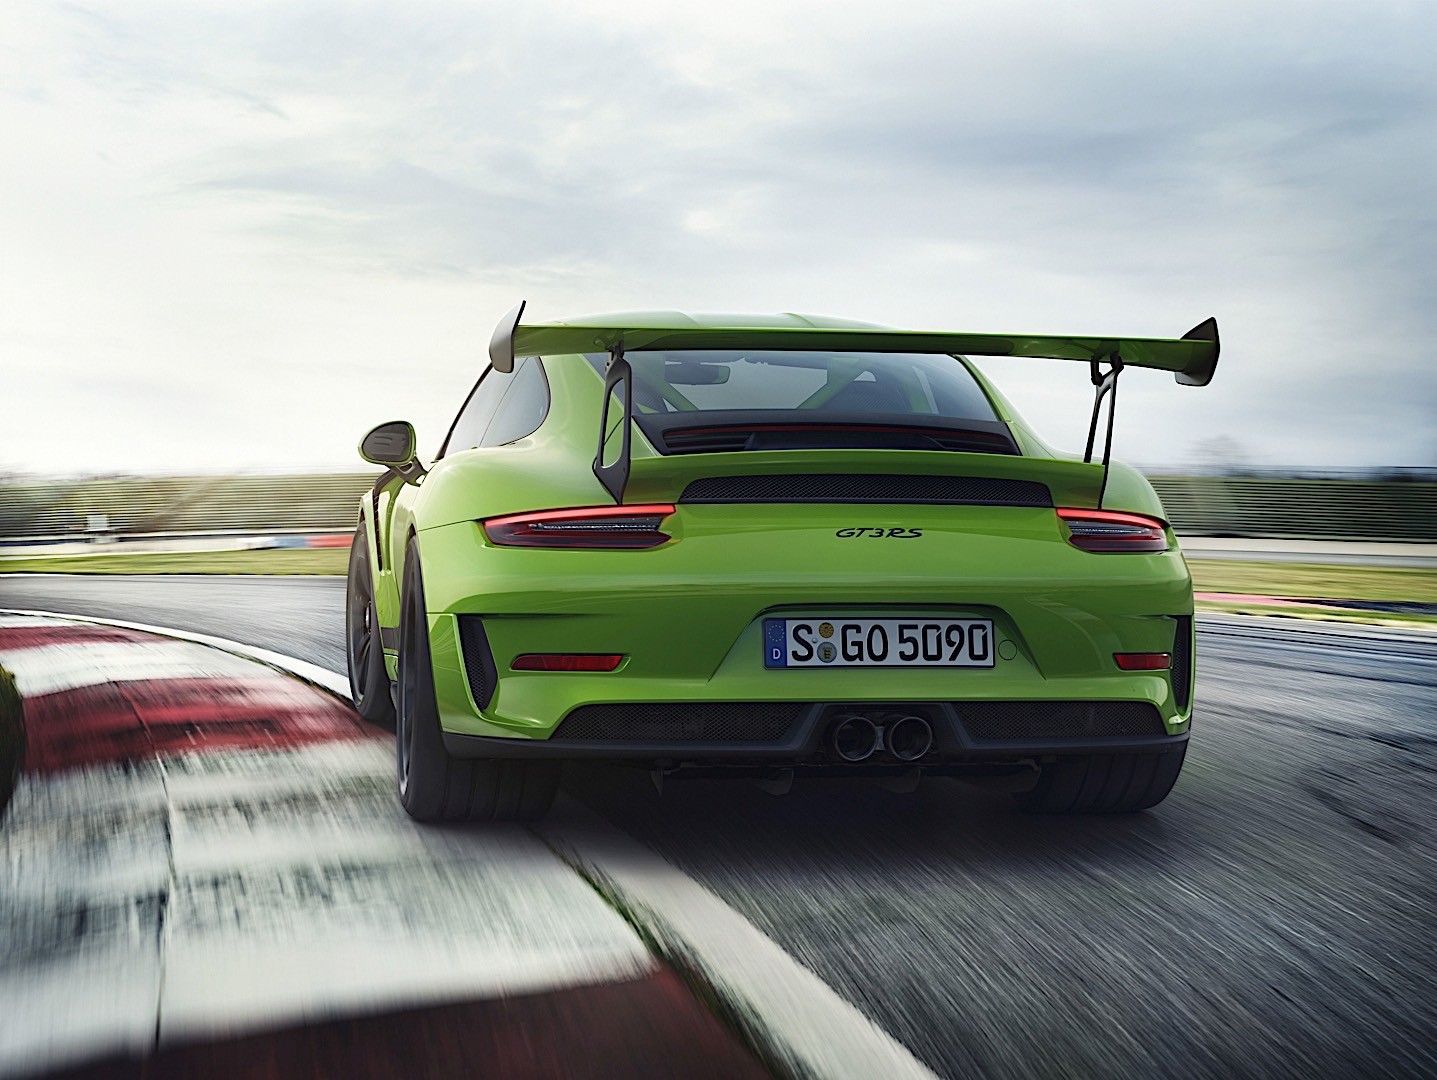 Porsche 911 GT3 RS (991.2) (2019) – Specifications & Performance